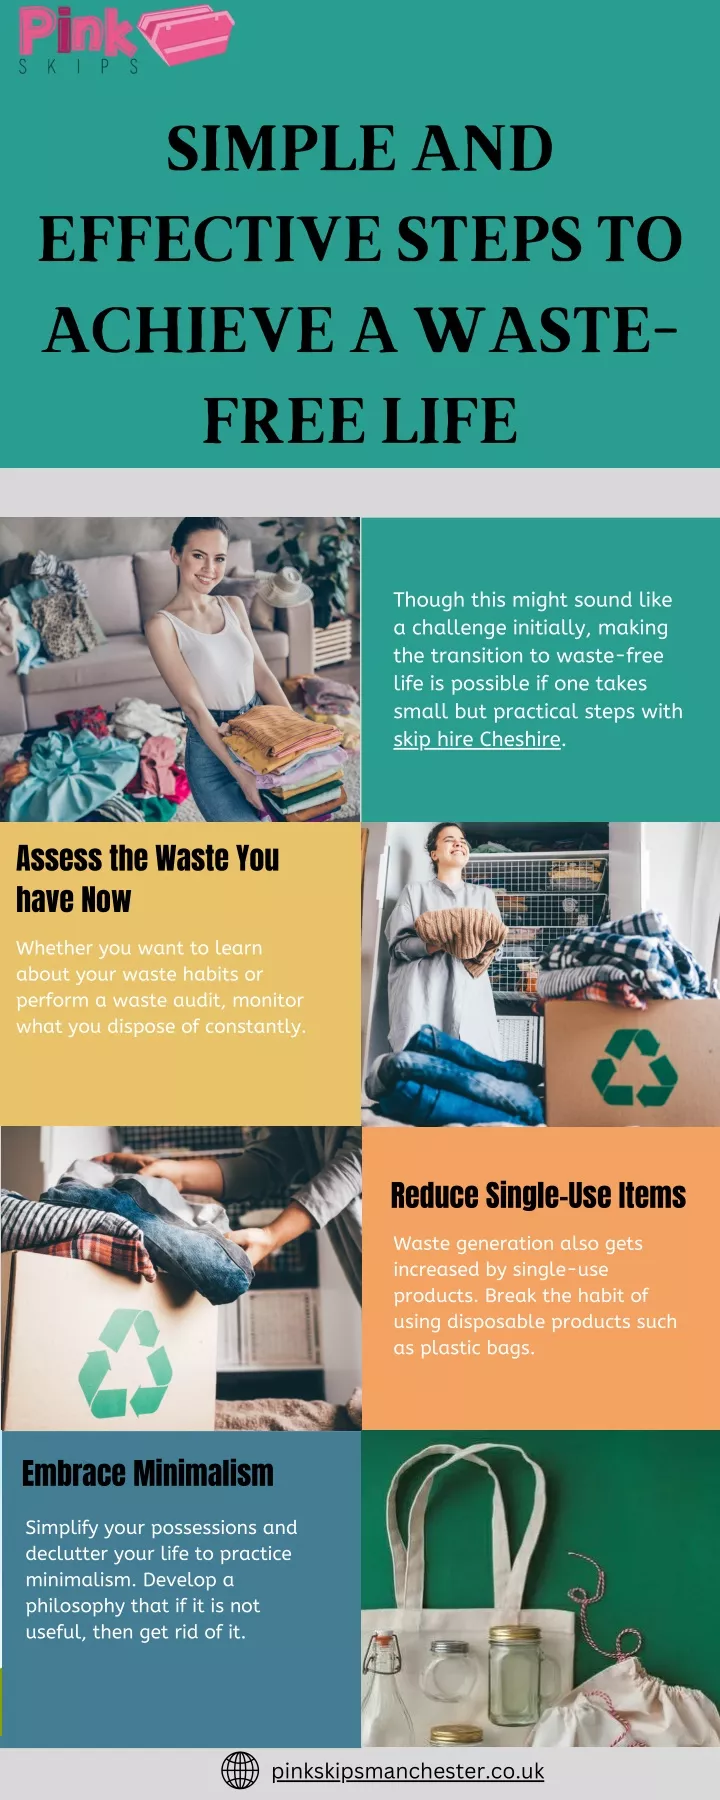 simple and effective steps to achieve a waste